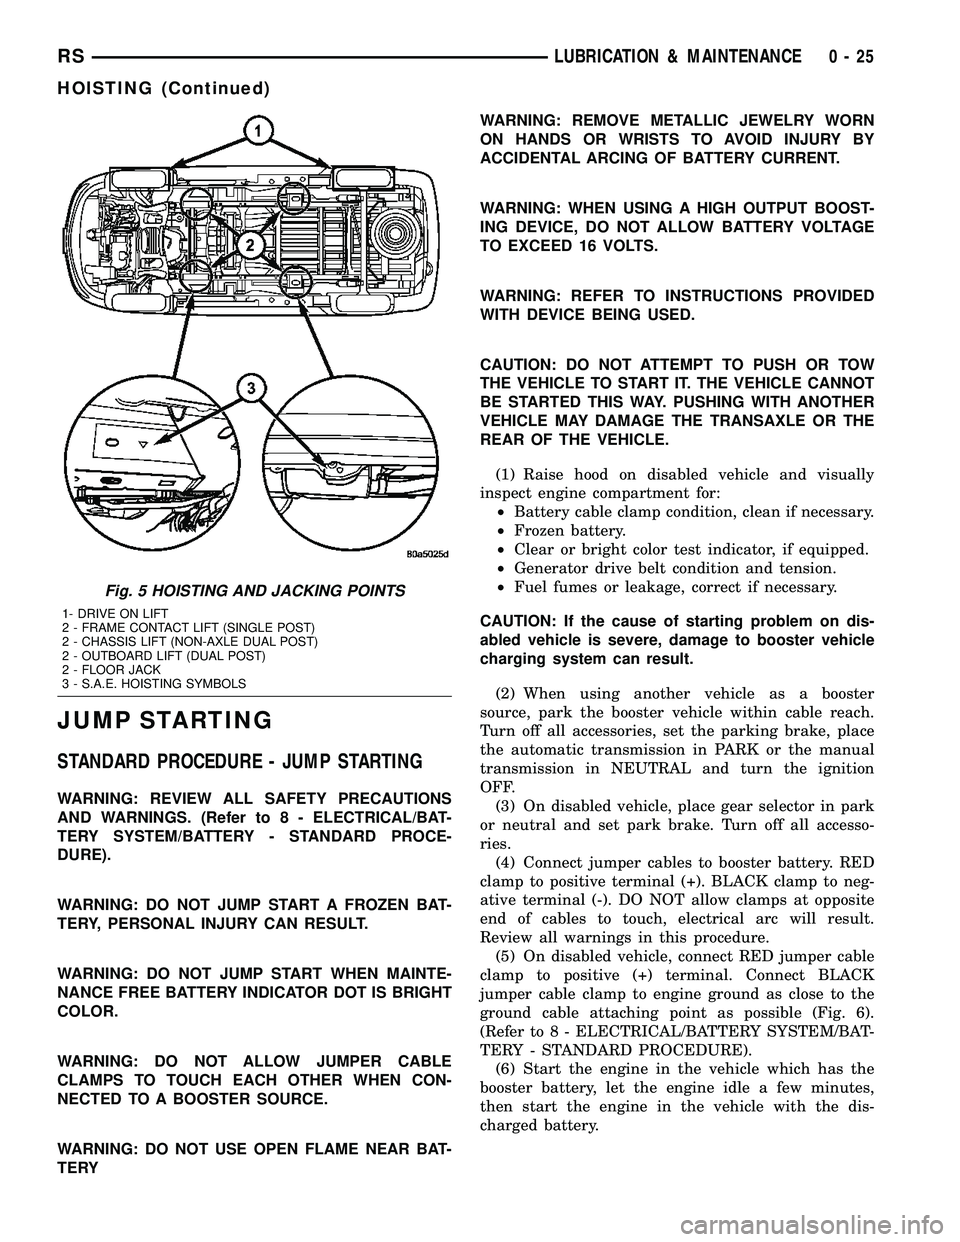 CHRYSLER VOYAGER 2005  Service Manual JUMP STARTING
STANDARD PROCEDURE - JUMP STARTING
WARNING: REVIEW ALL SAFETY PRECAUTIONS
AND WARNINGS. (Refer to 8 - ELECTRICAL/BAT-
TERY SYSTEM/BATTERY - STANDARD PROCE-
DURE).
WARNING: DO NOT JUMP ST